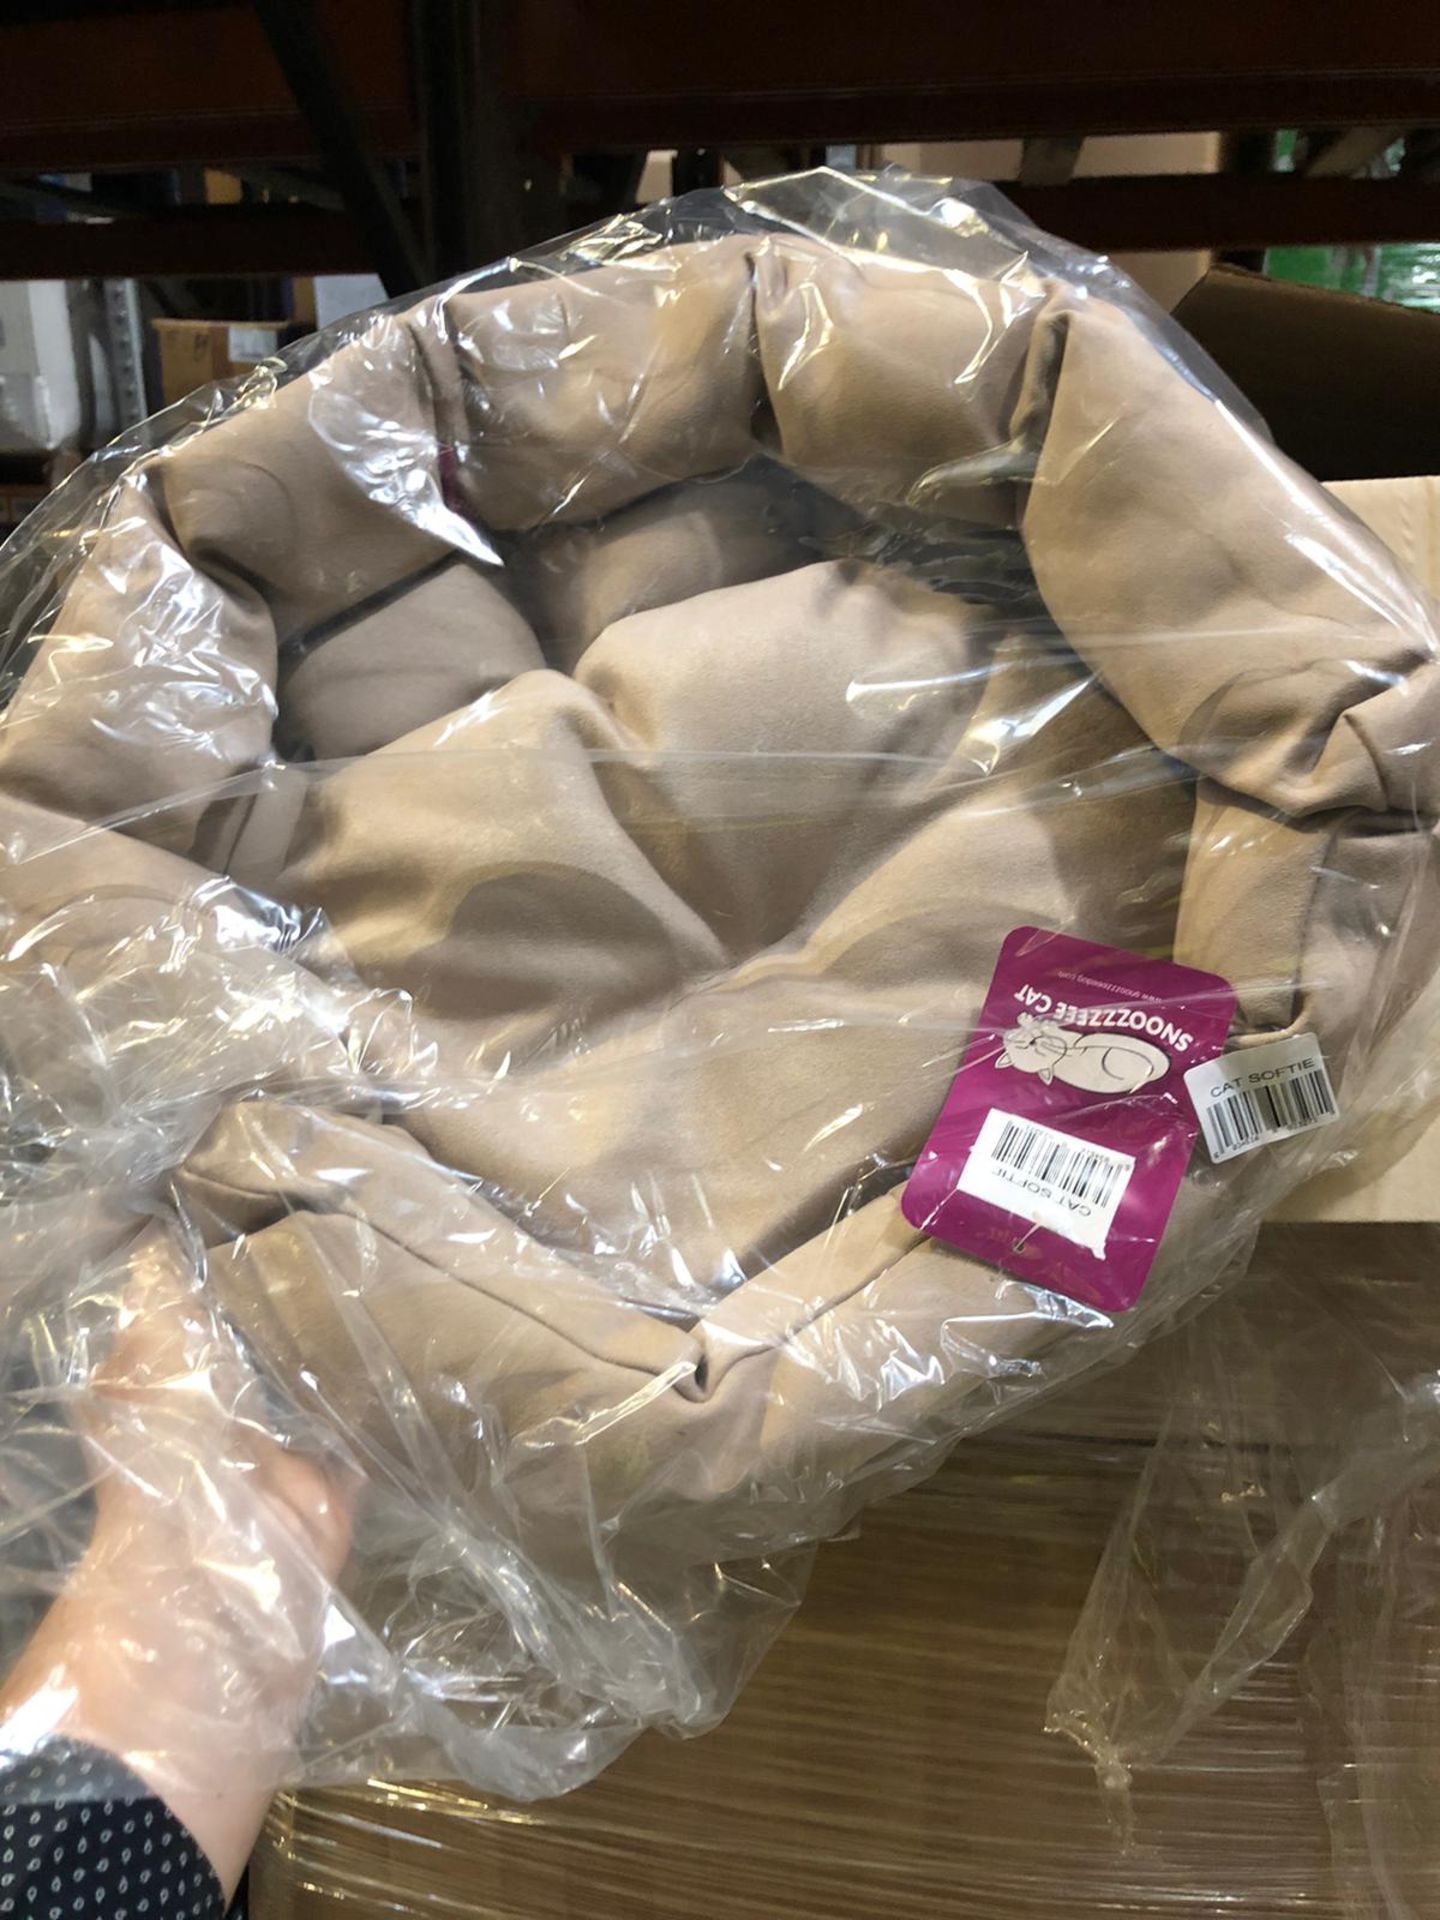 1 x Pallet of Luxury Pet Beds/Pet Products. Includes Mainly Pet Beds In Various Sizes & Styles. - Image 3 of 10